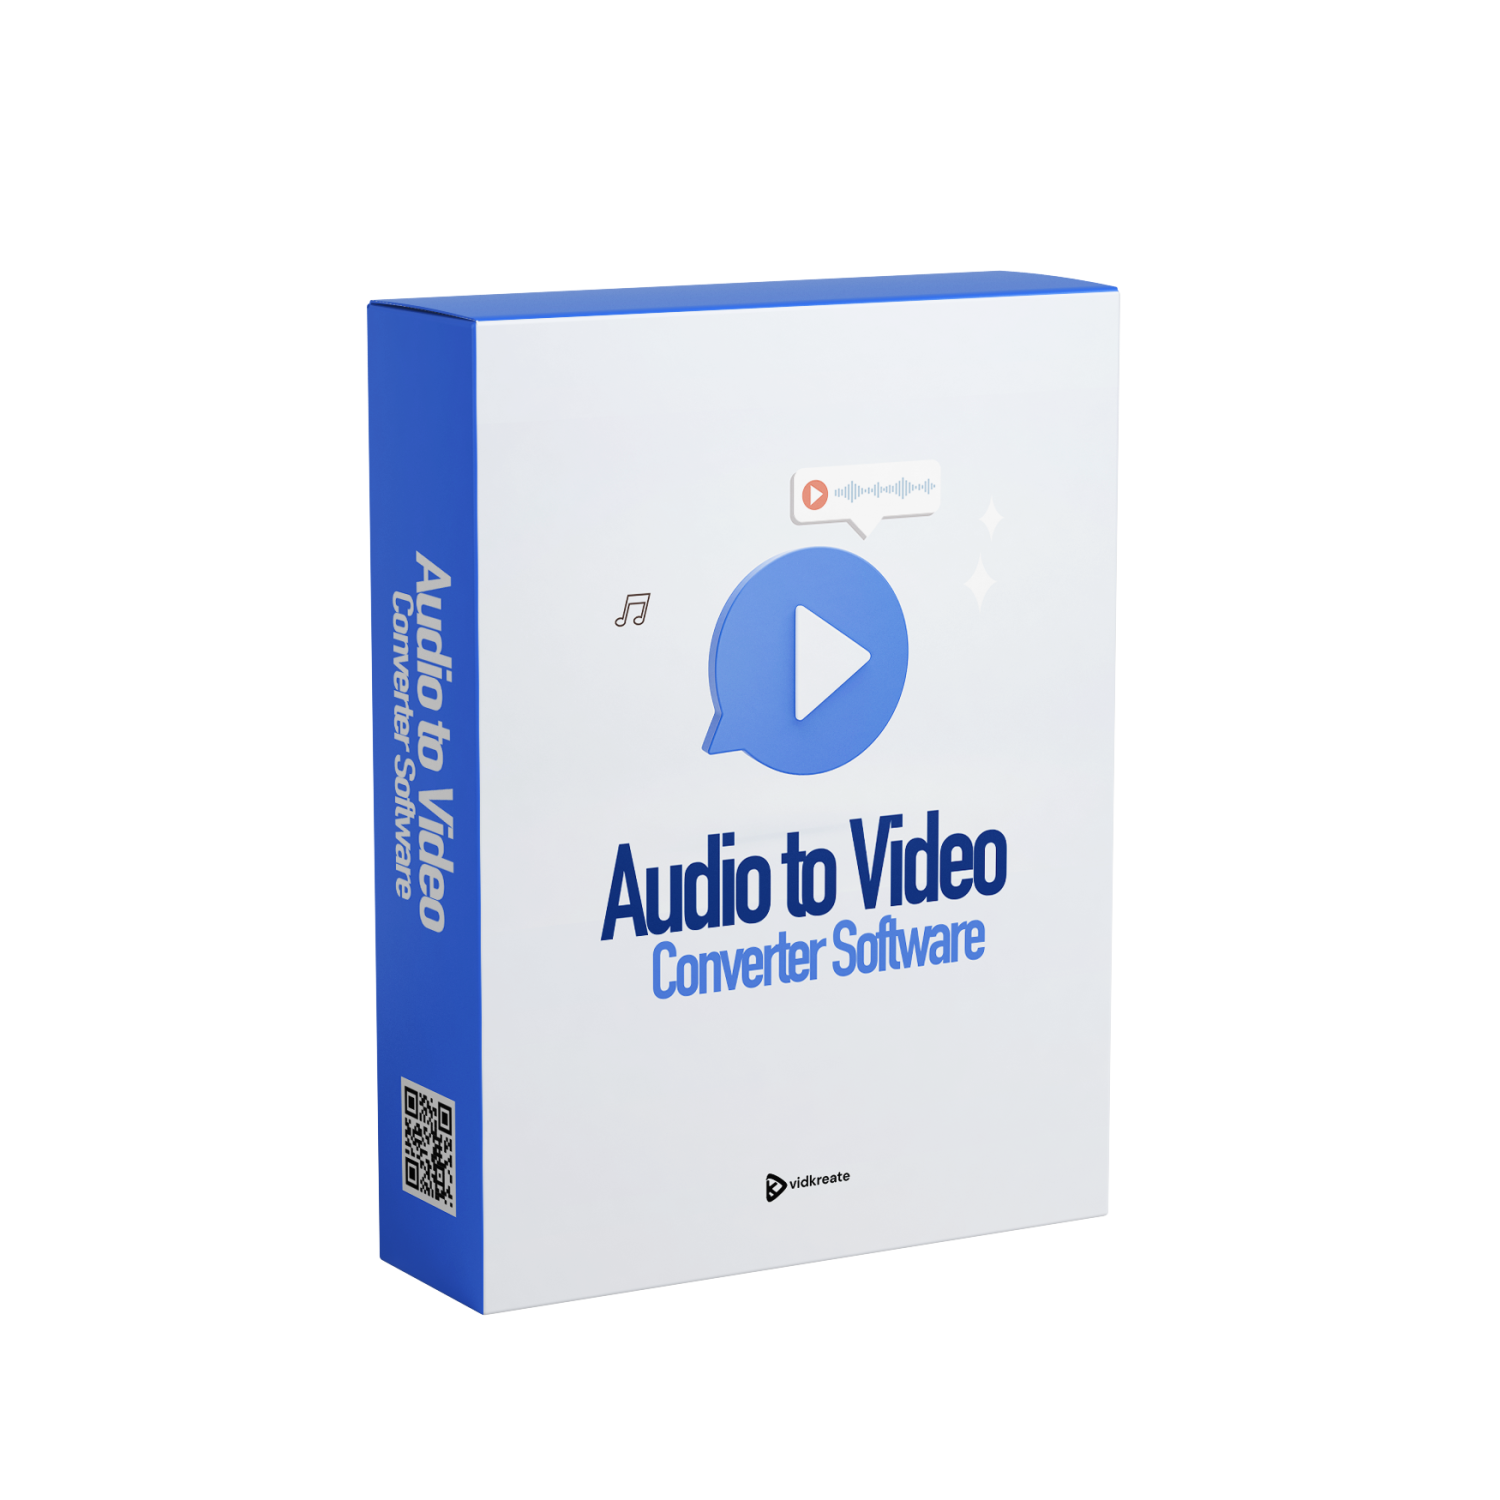 Audio to Video Converter Software